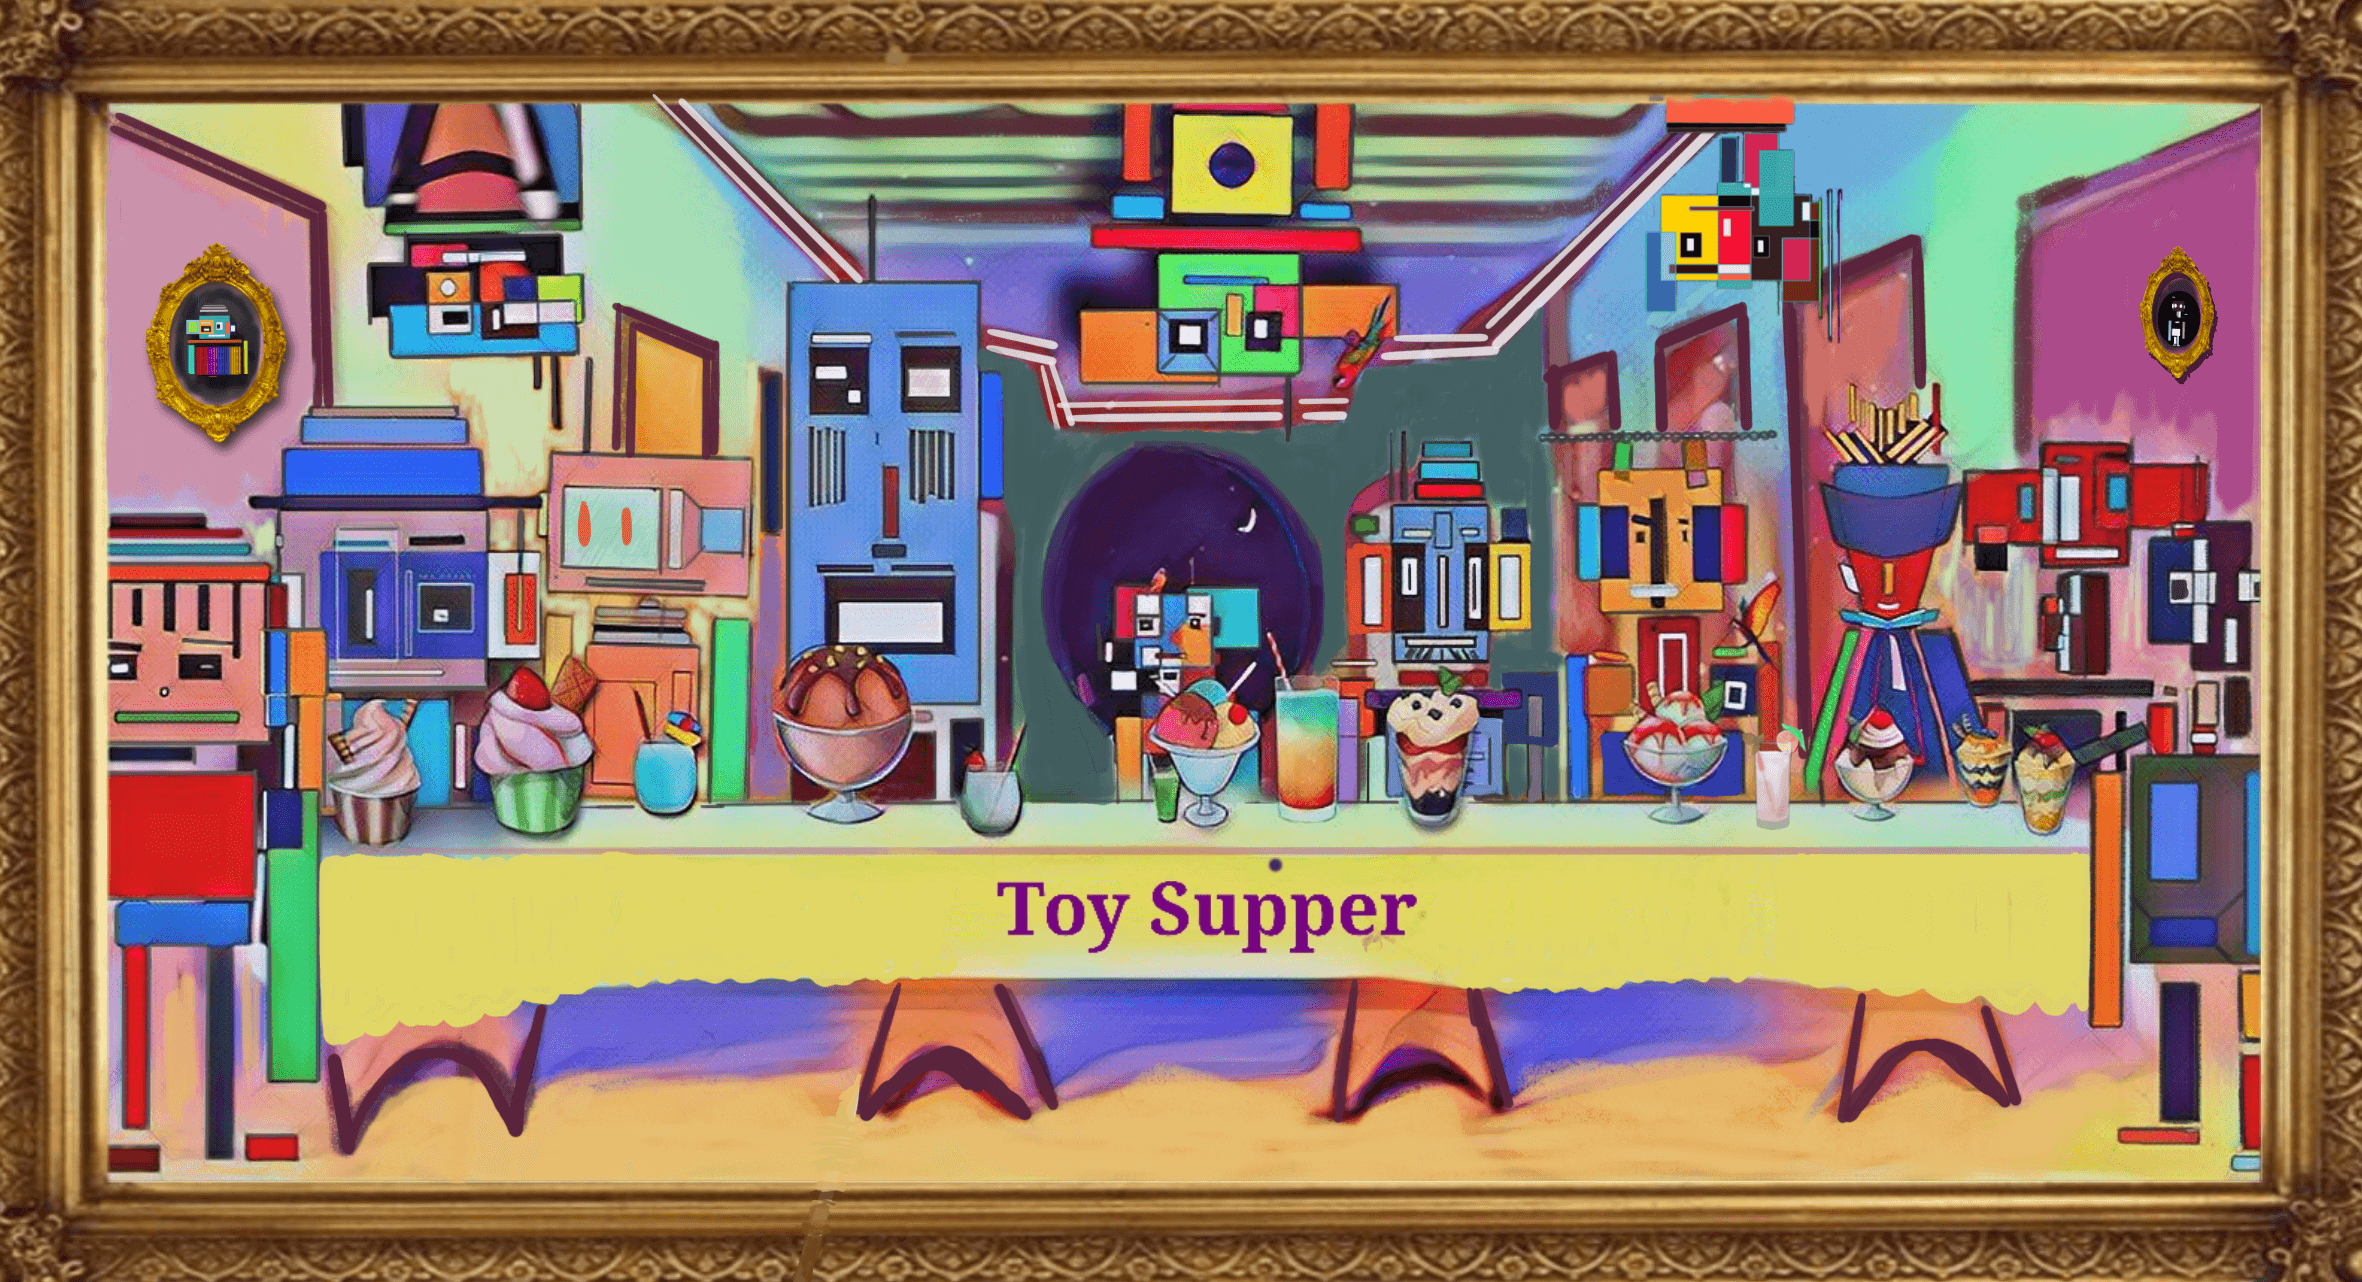 Toy Supper